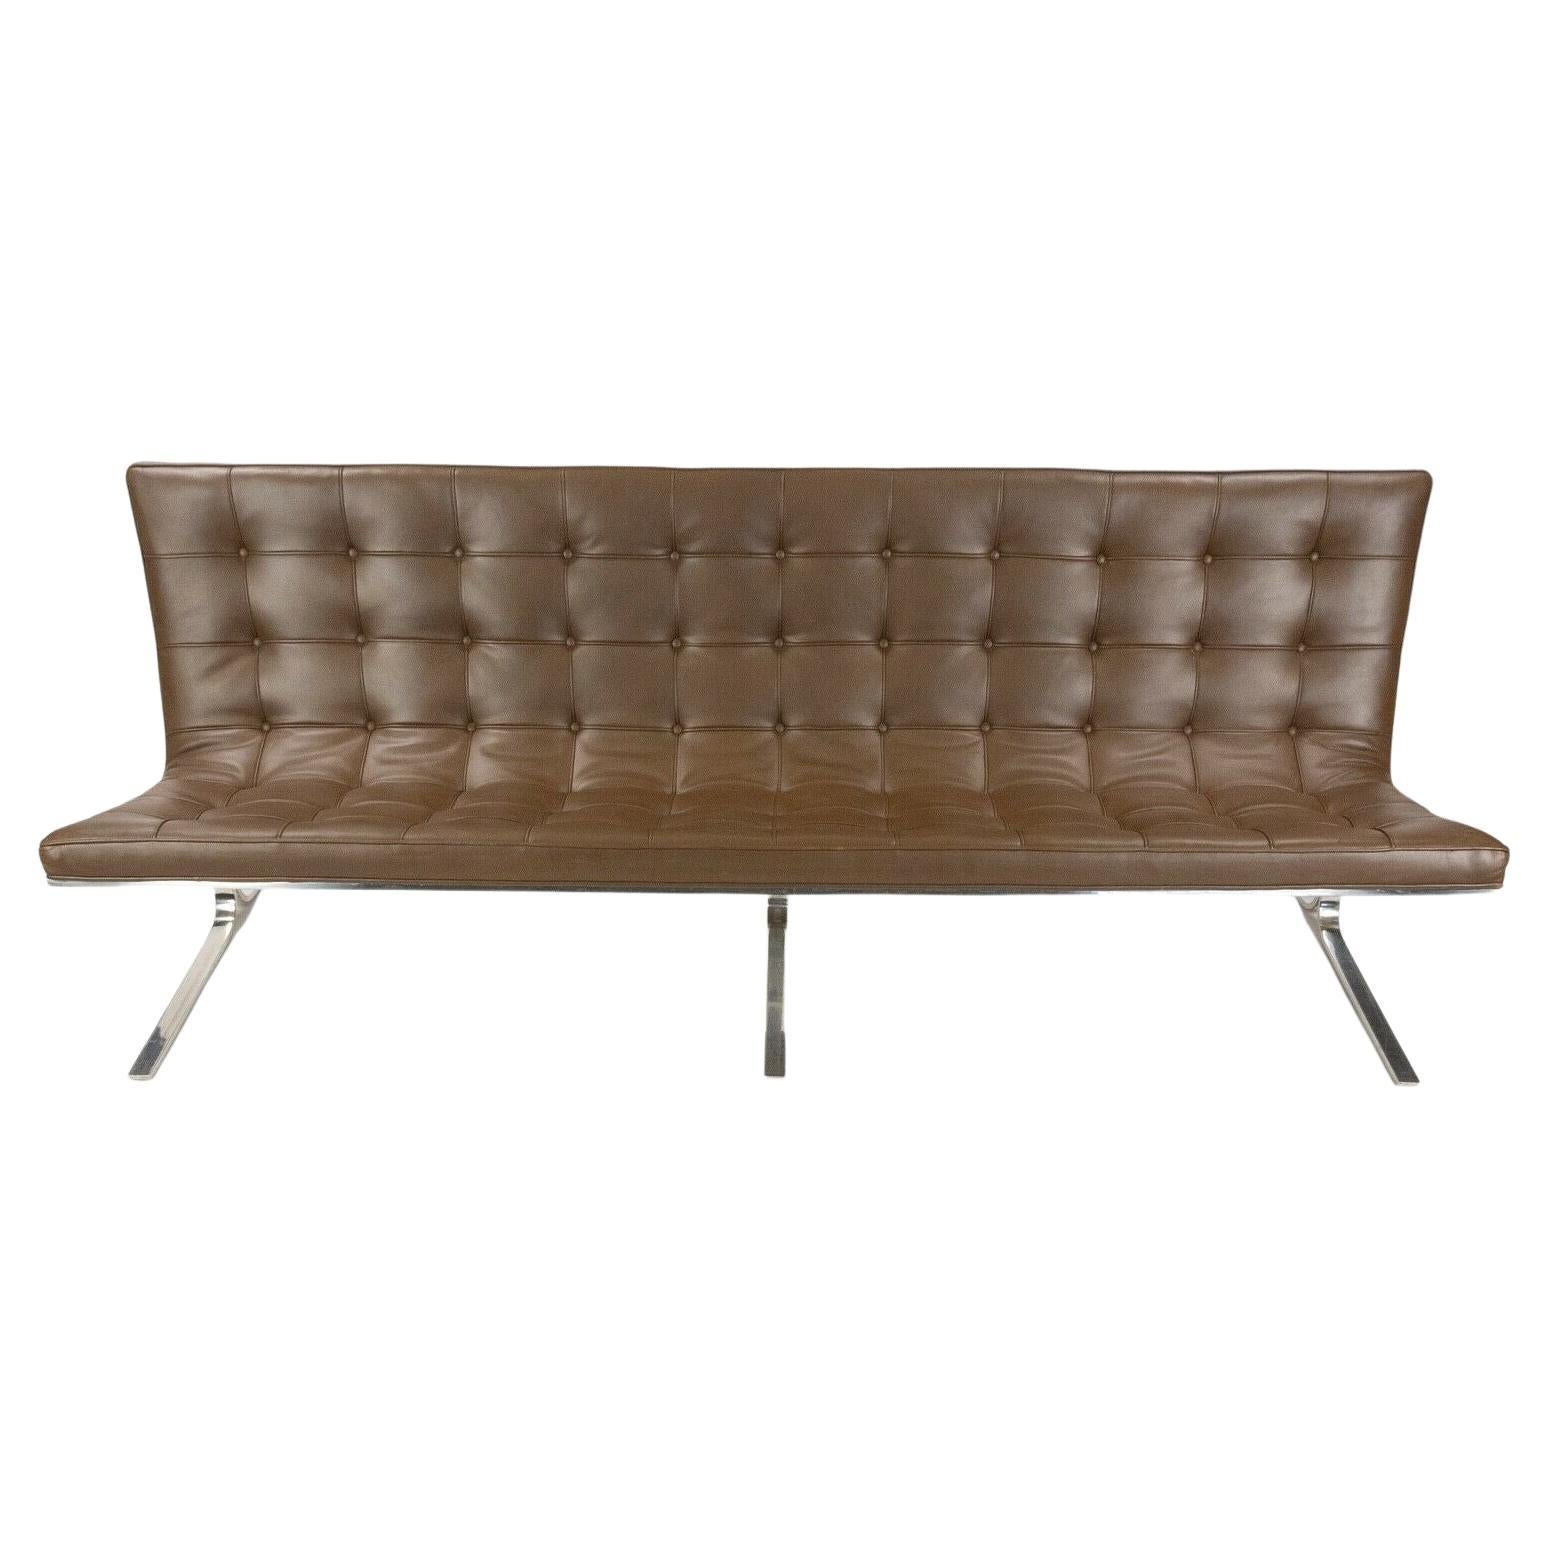 Listed for sale is a notable and very rare Nicos Zographos CH28 ribbon three-seater sofa in brown leather, produced by Nicos Zographos Designs Inc. The custom fabricate and polished stainless steel legs have a nice patina and the leather is clean